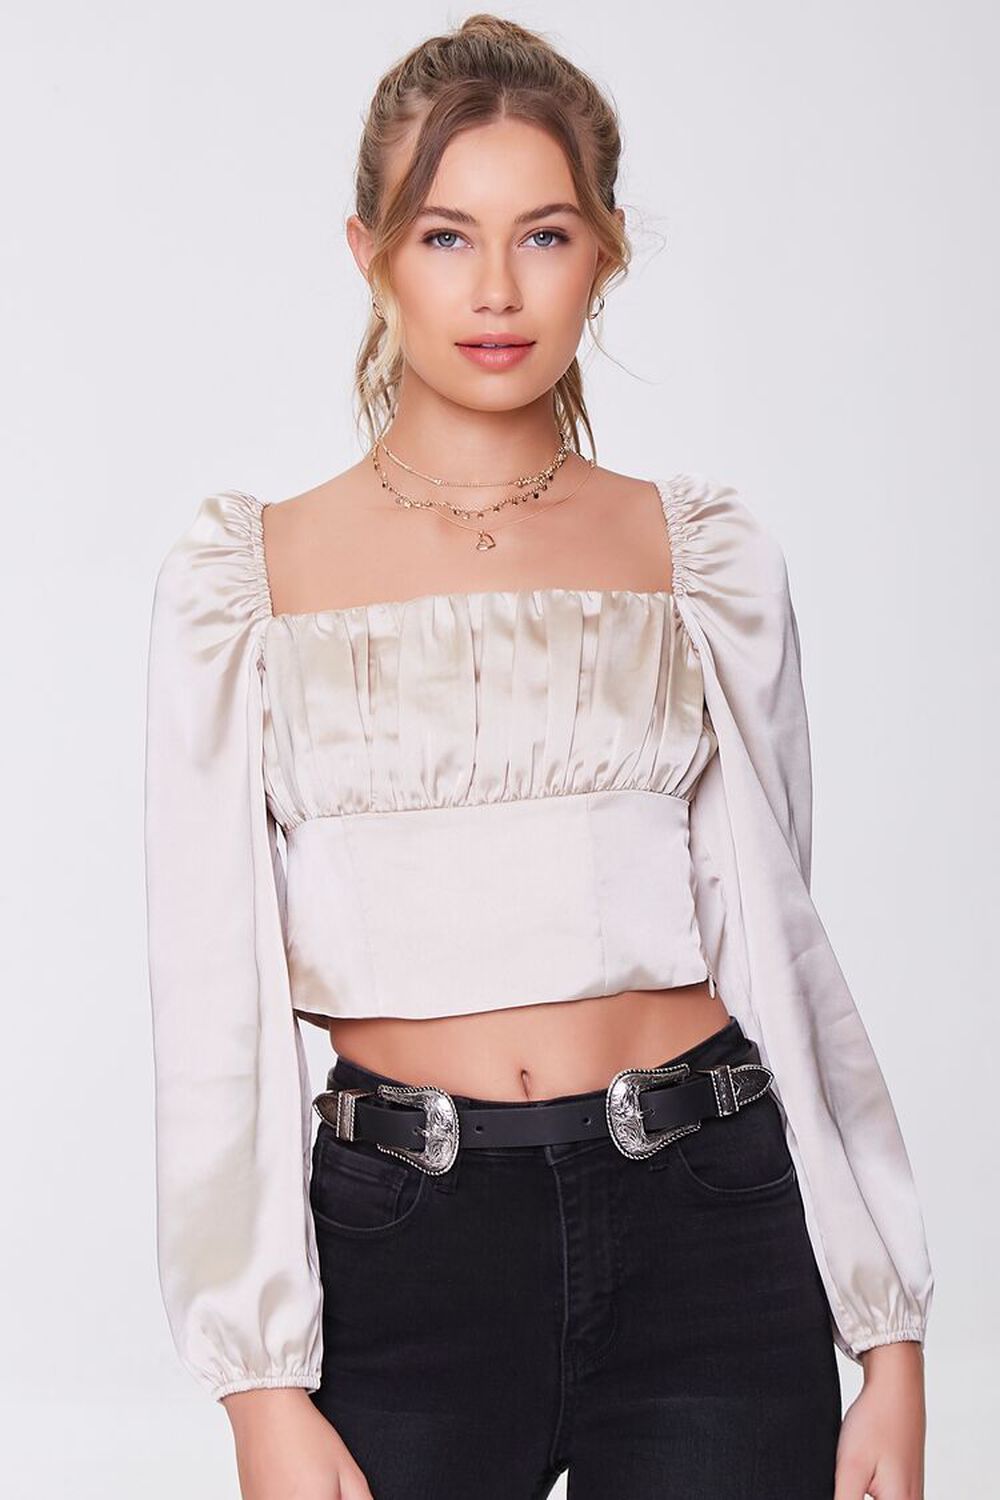 CHAMPAGNE Satin Pintucked Crop Top, image 1